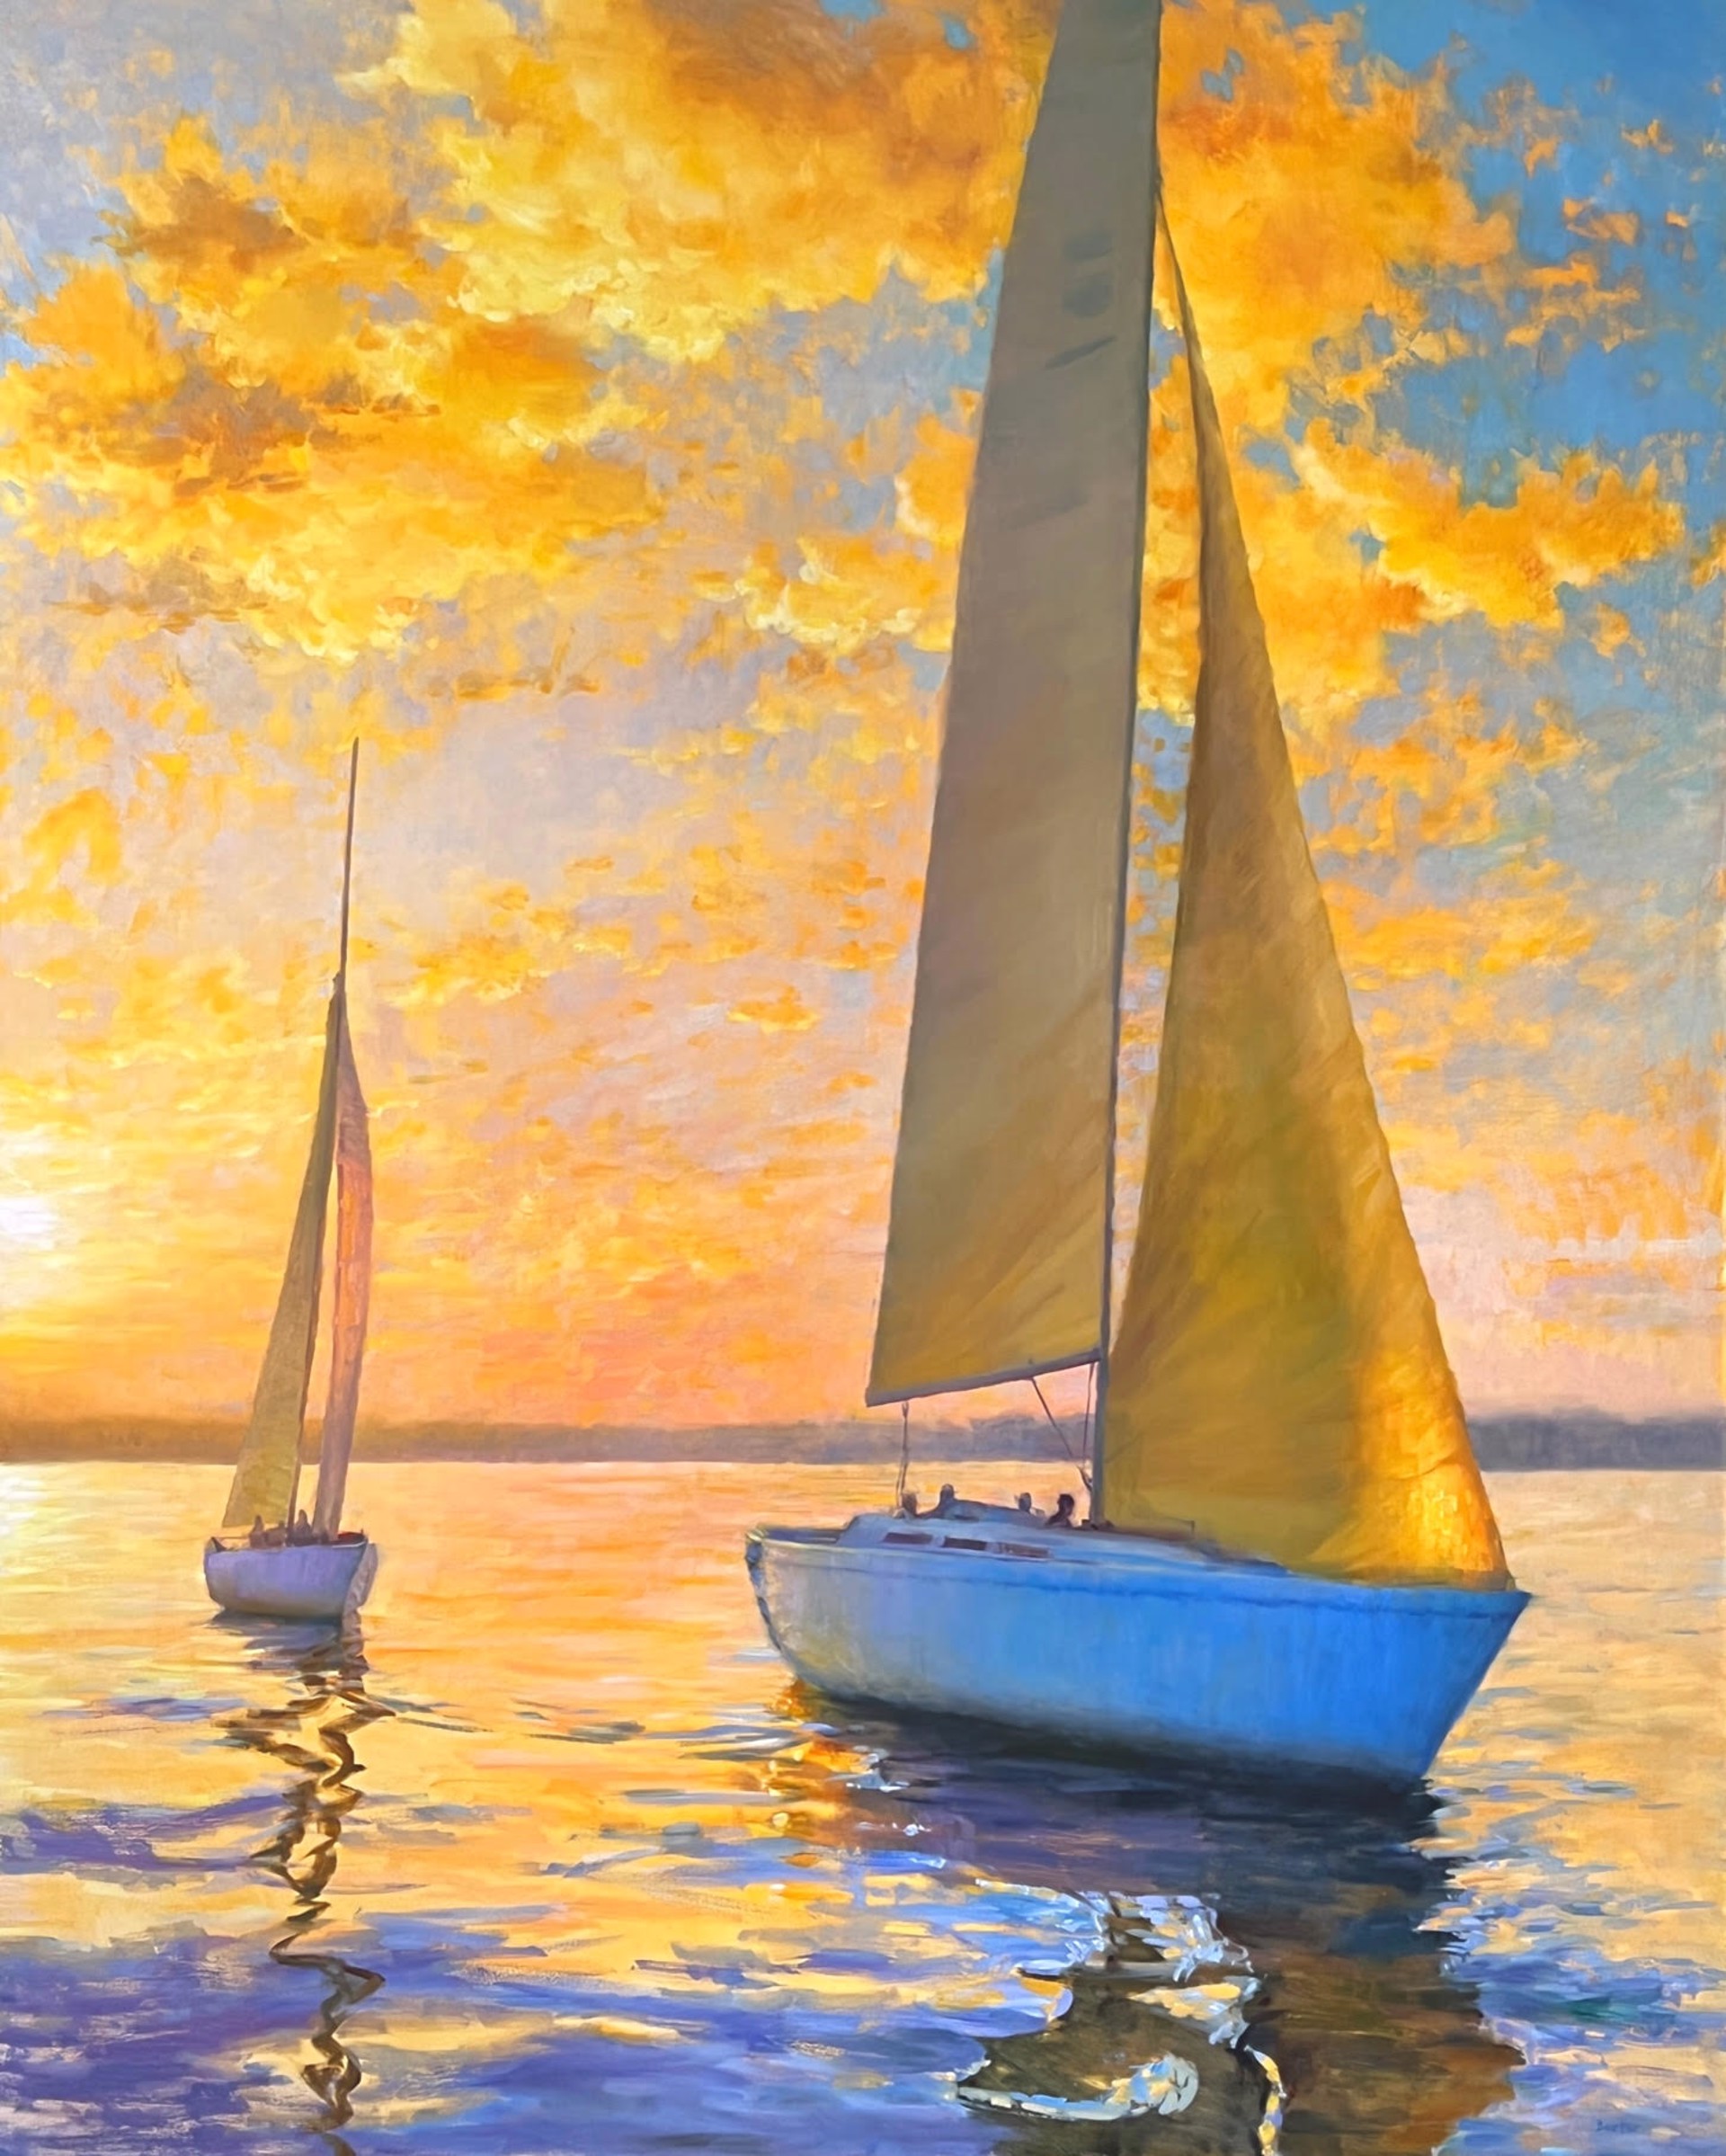 "Sails and Sinking Sun" by Stacy Barter